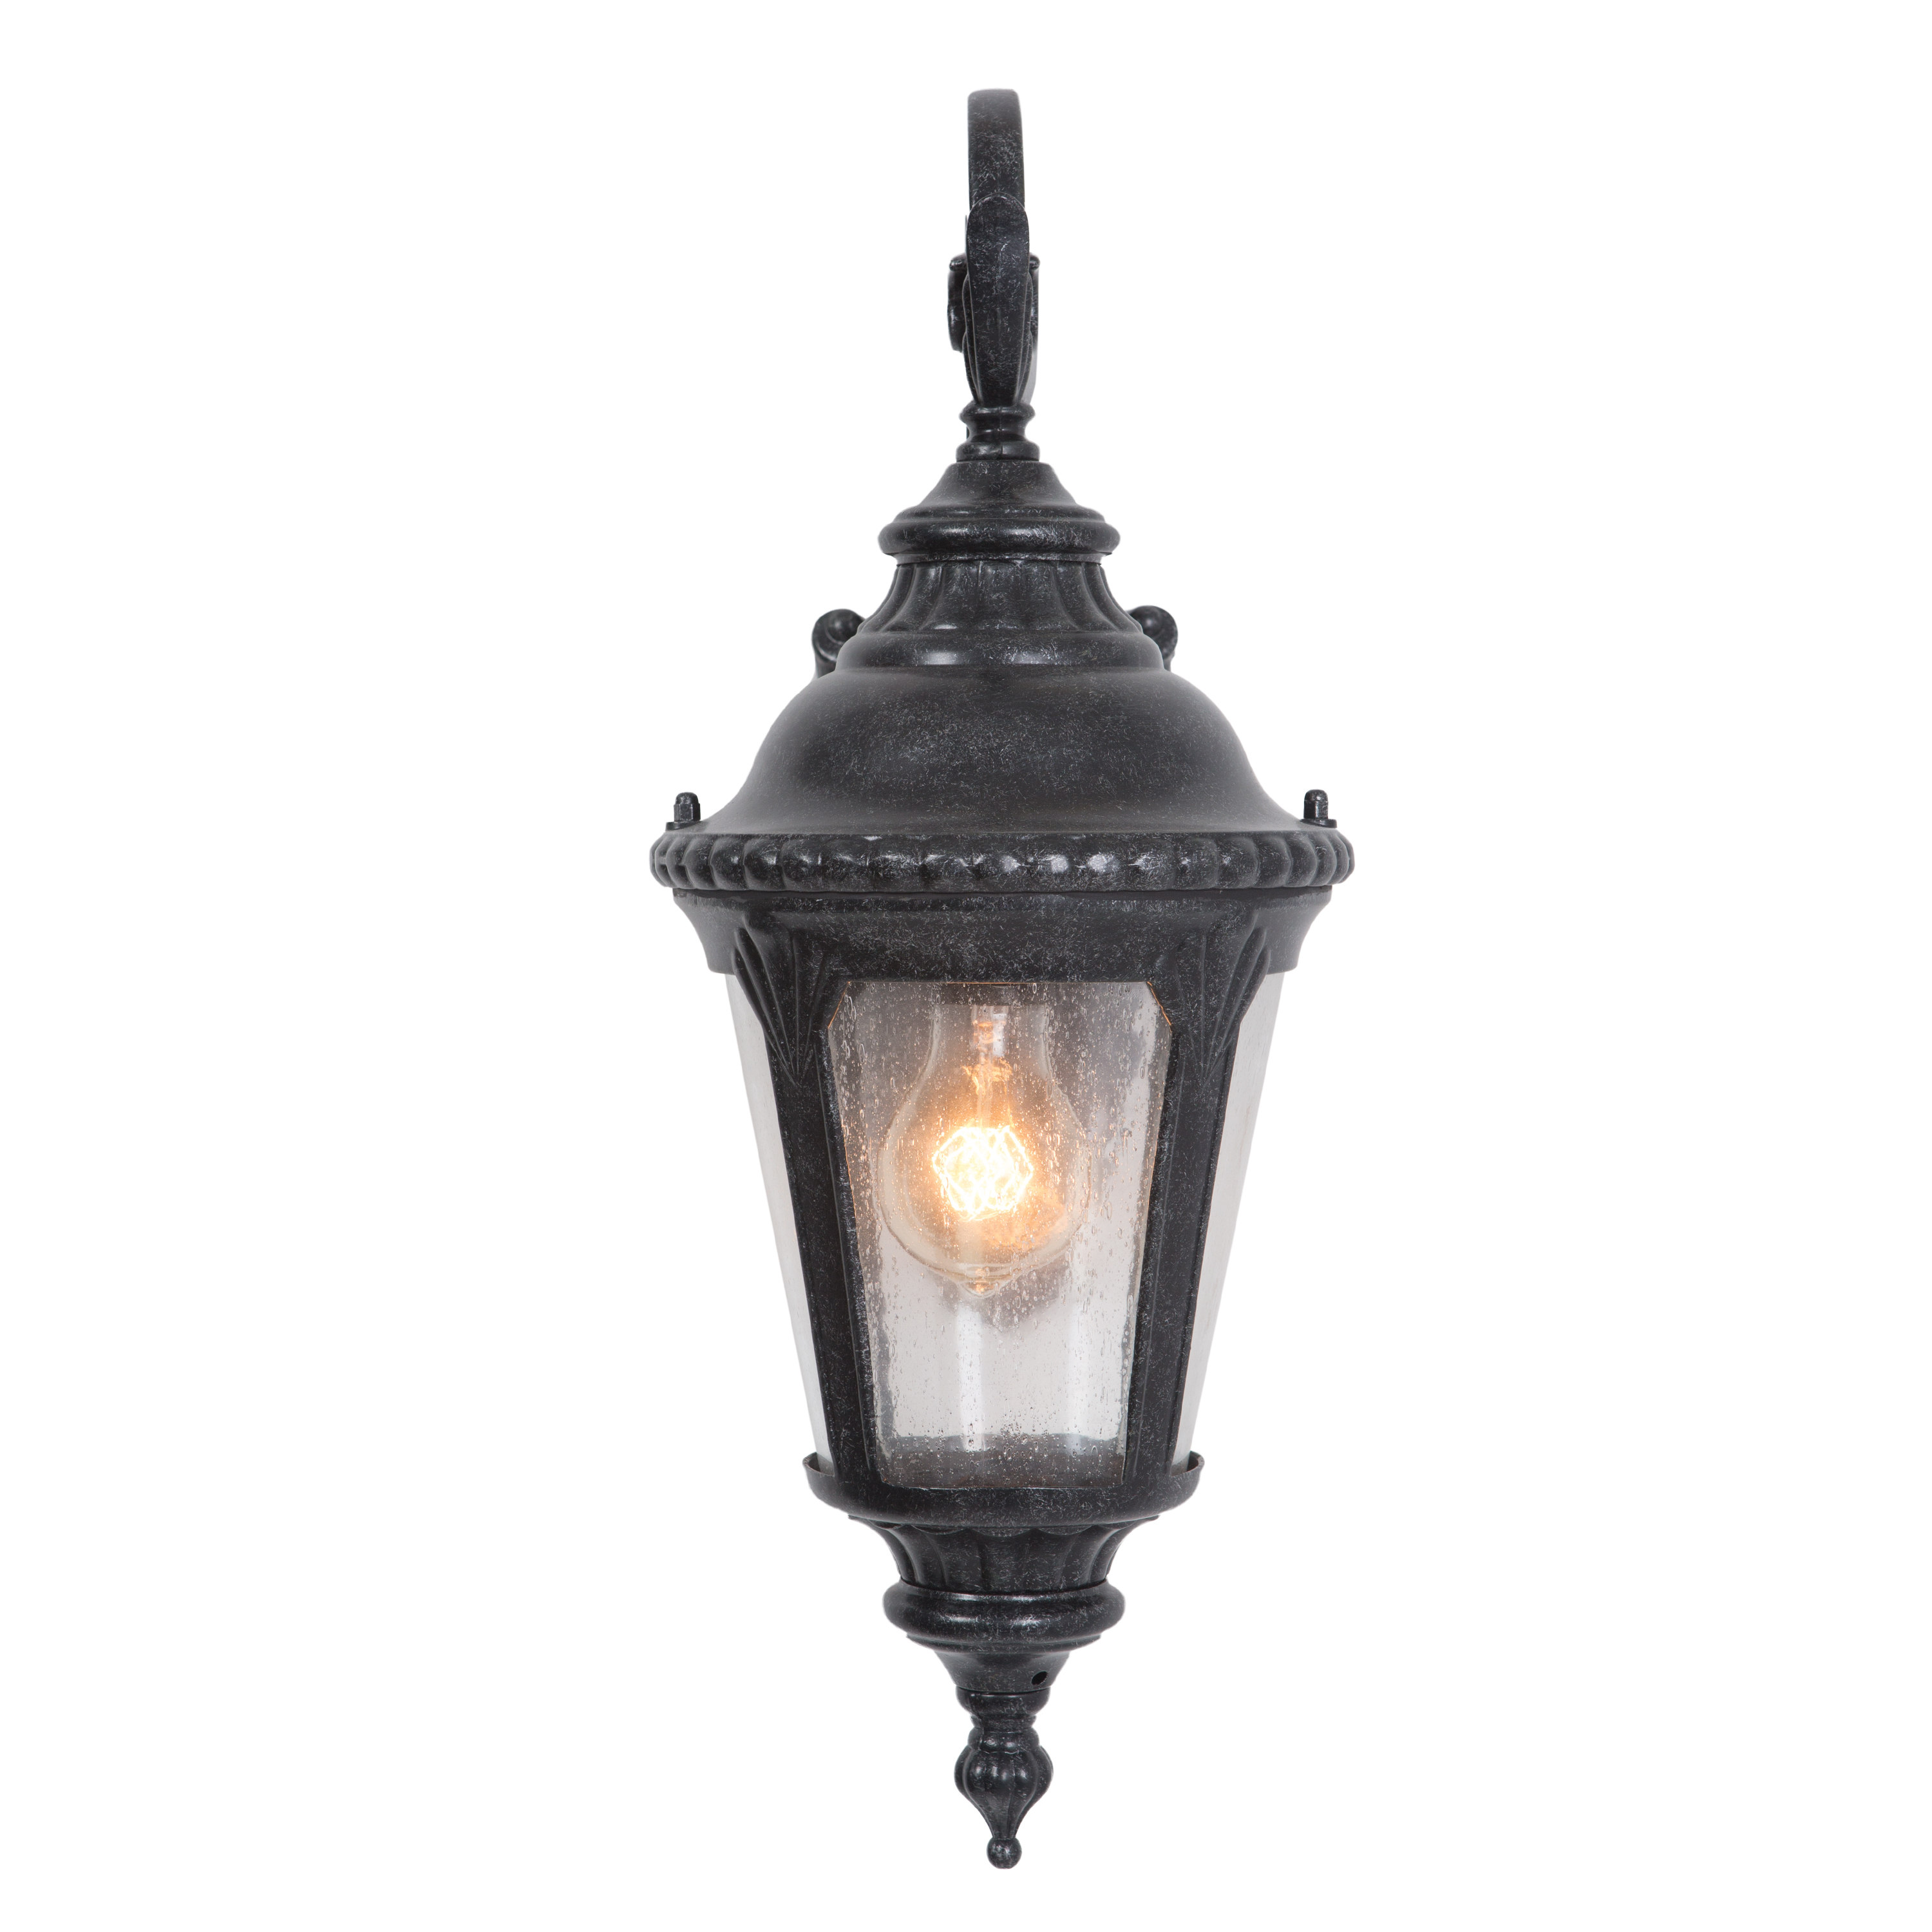 Yosemite Home Decor Columbus 7201ST-1 Outdoor Wall Sconce - image 4 of 4